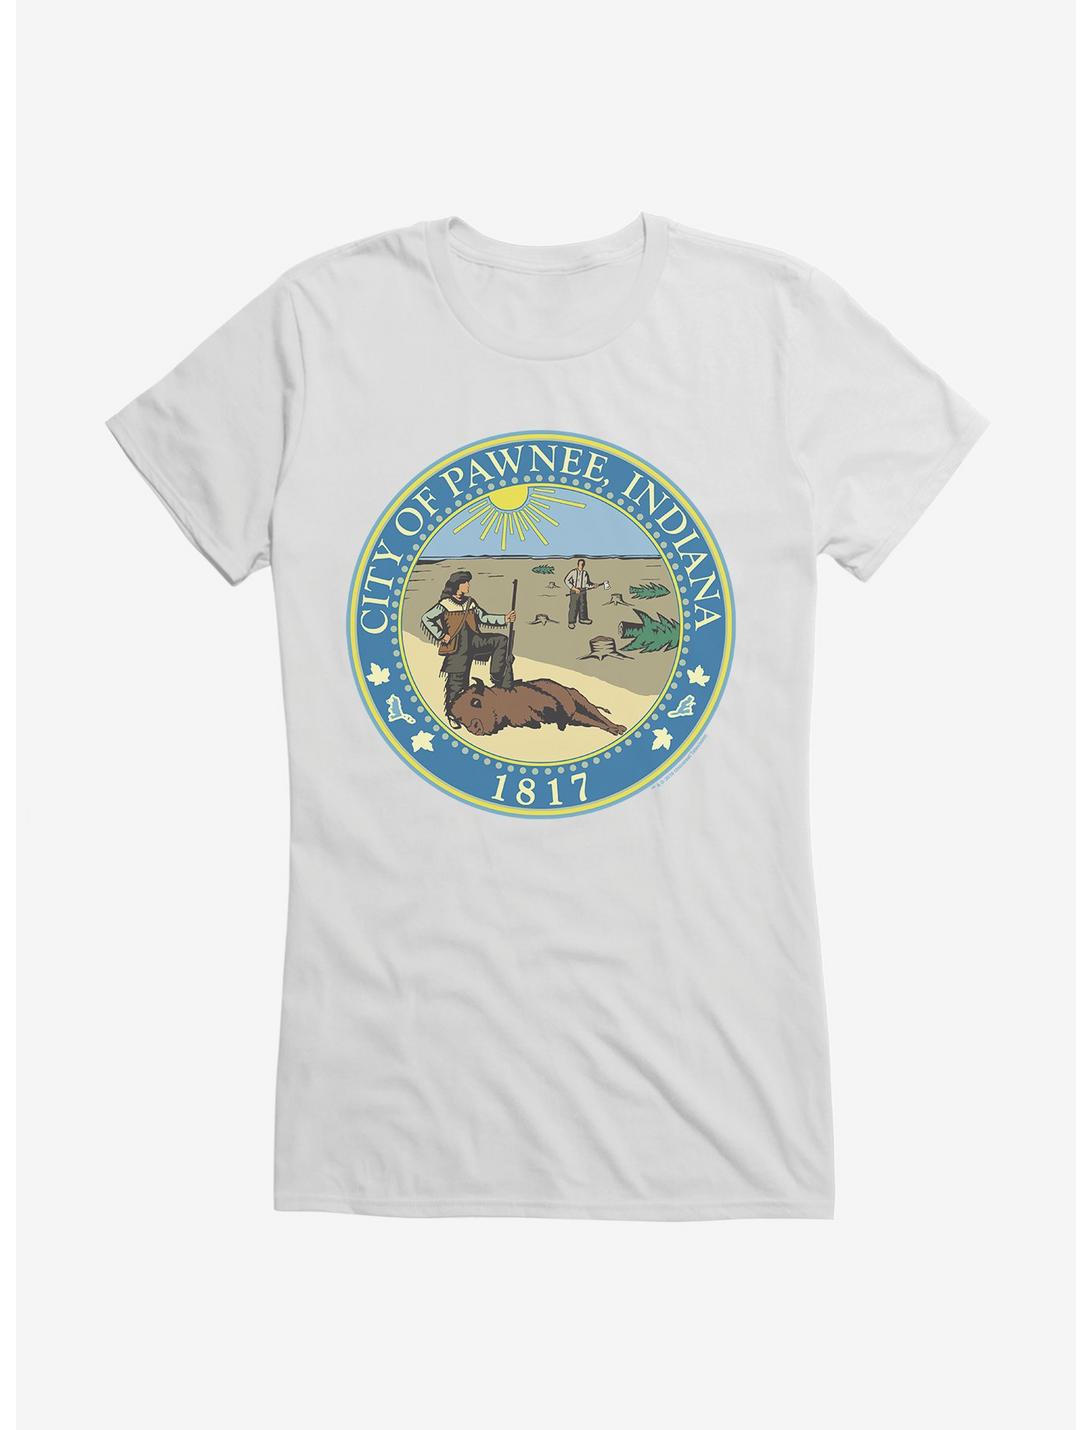 Parks And Recreation Pawnee Indiana Seal Girls T-Shirt, WHITE, hi-res